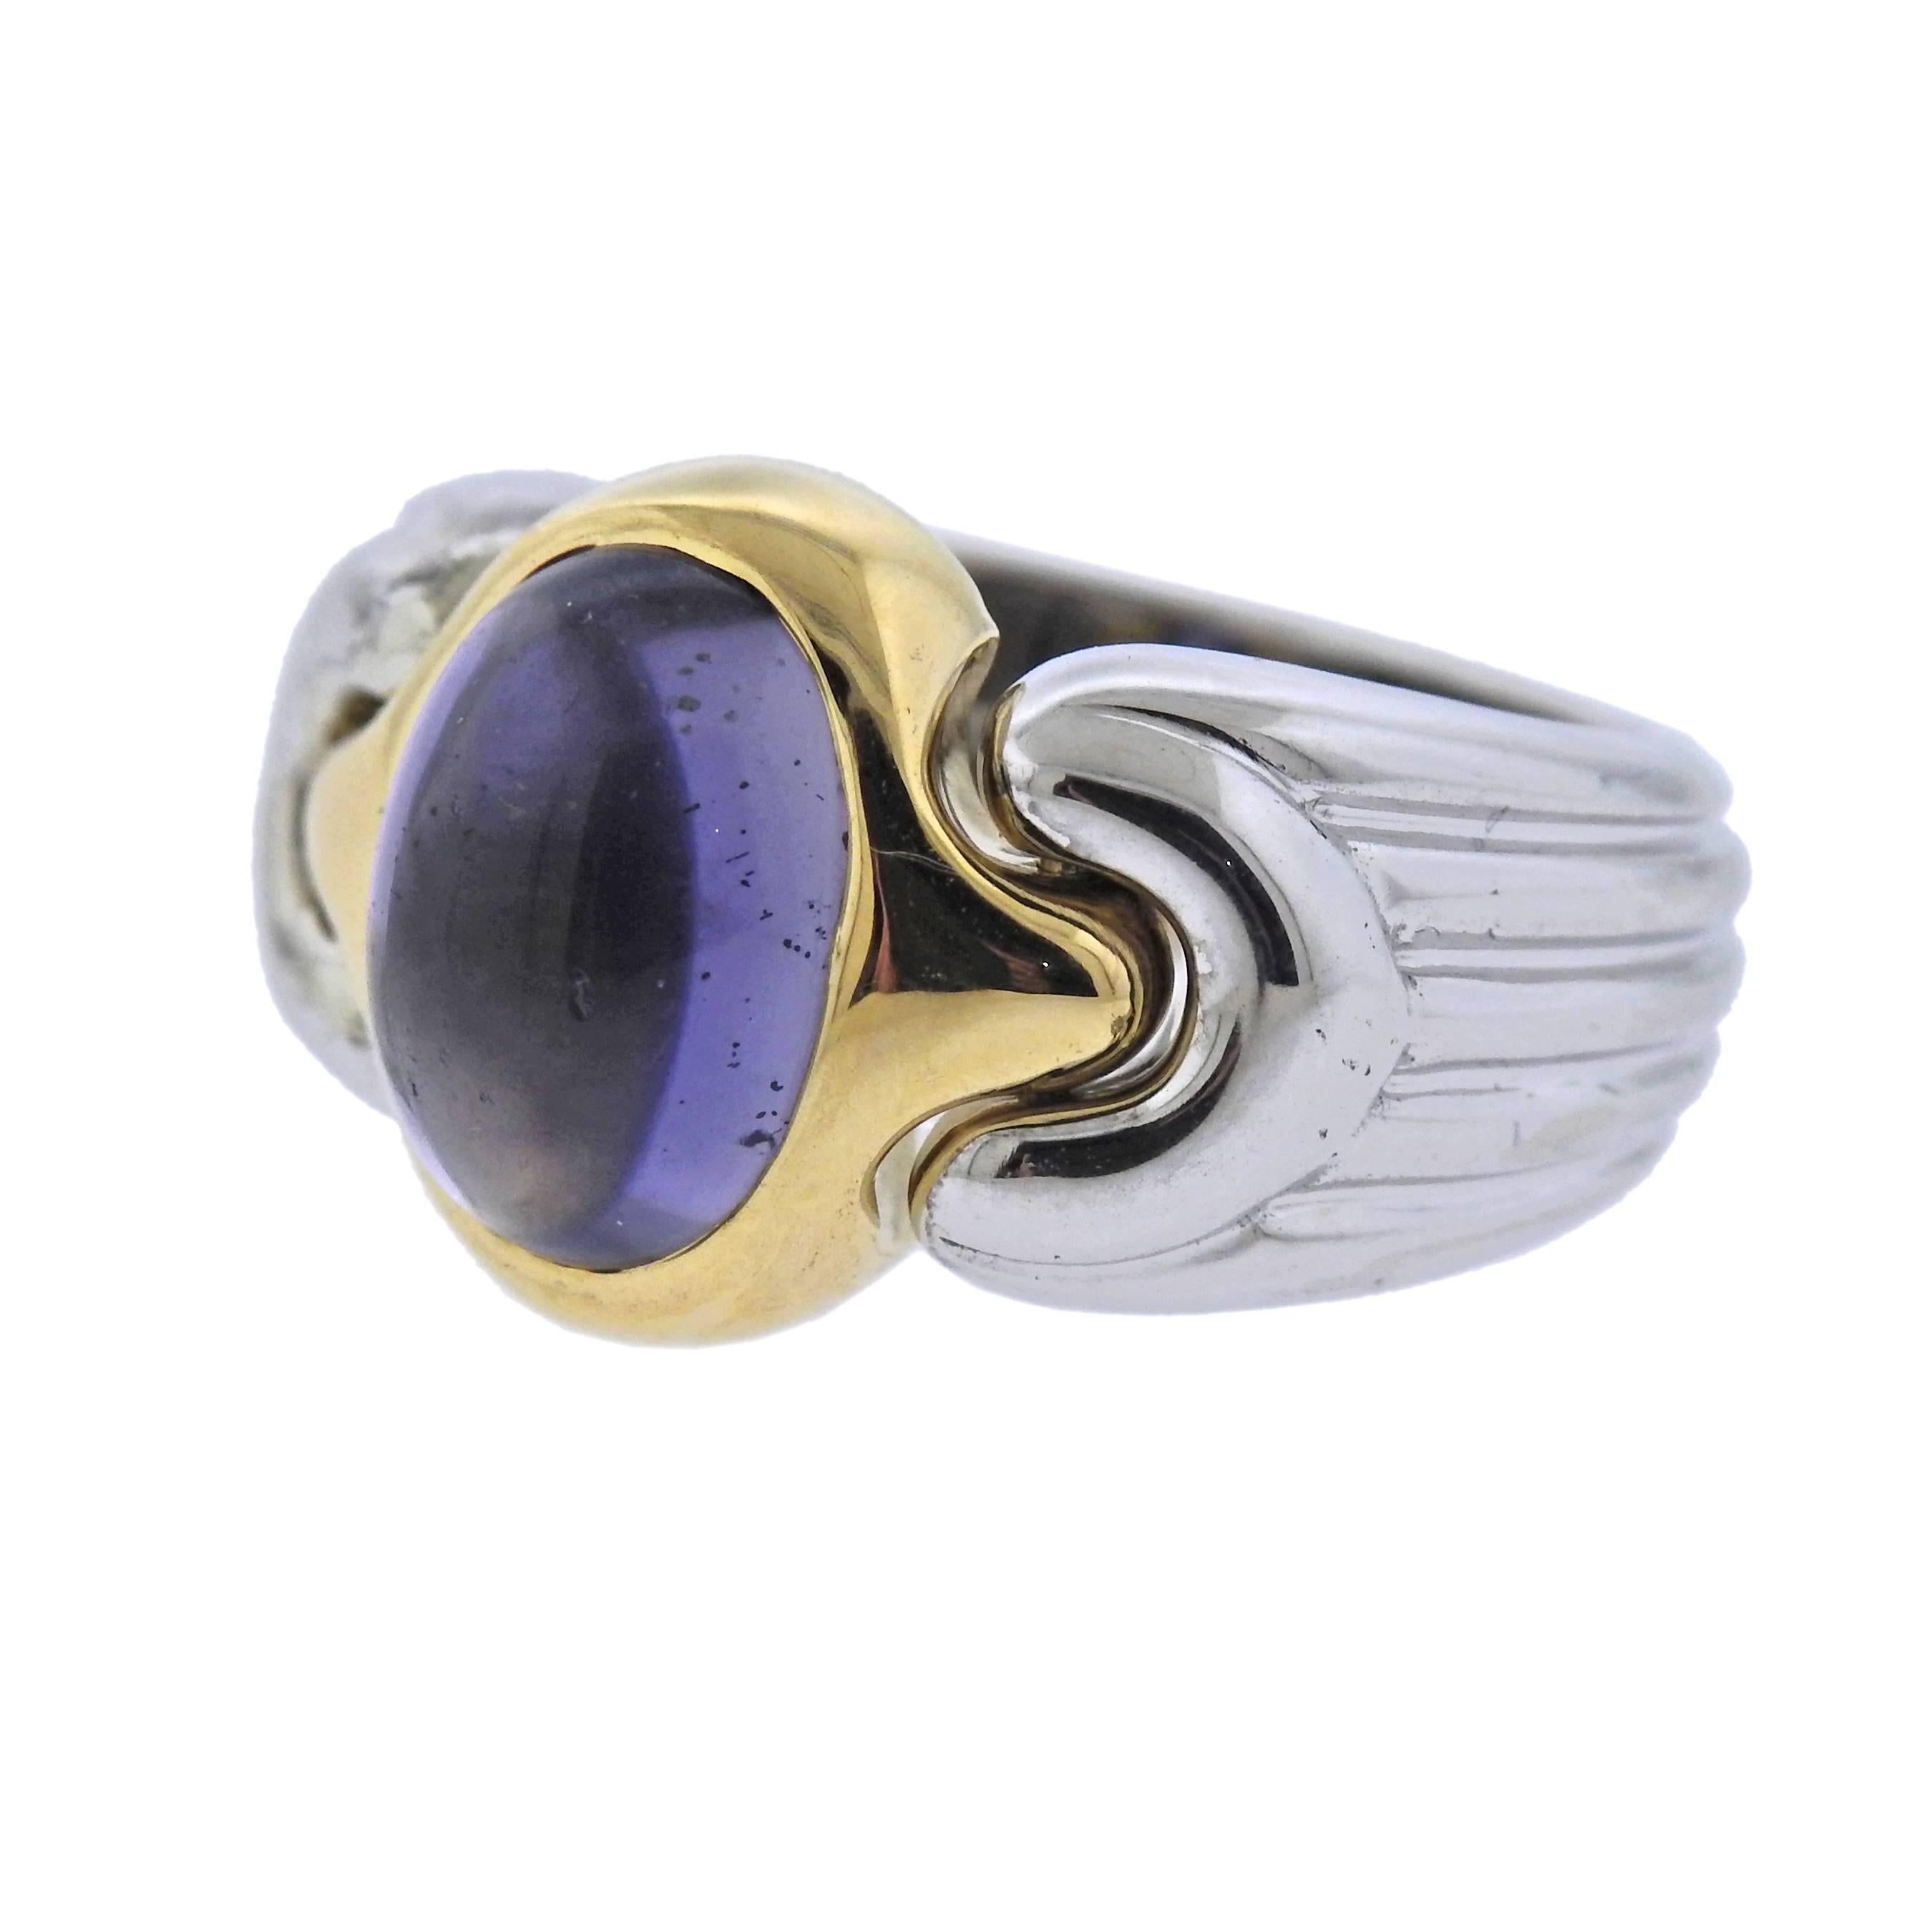 18k white and yellow gold ring by Bulgari, set with an 11mm x 8mm iolite cabochon. Ring size - 5, ring top is 13.6mm wide , weighs 13.5 grams. Marked: Bvlgari, 750, 2337AL.